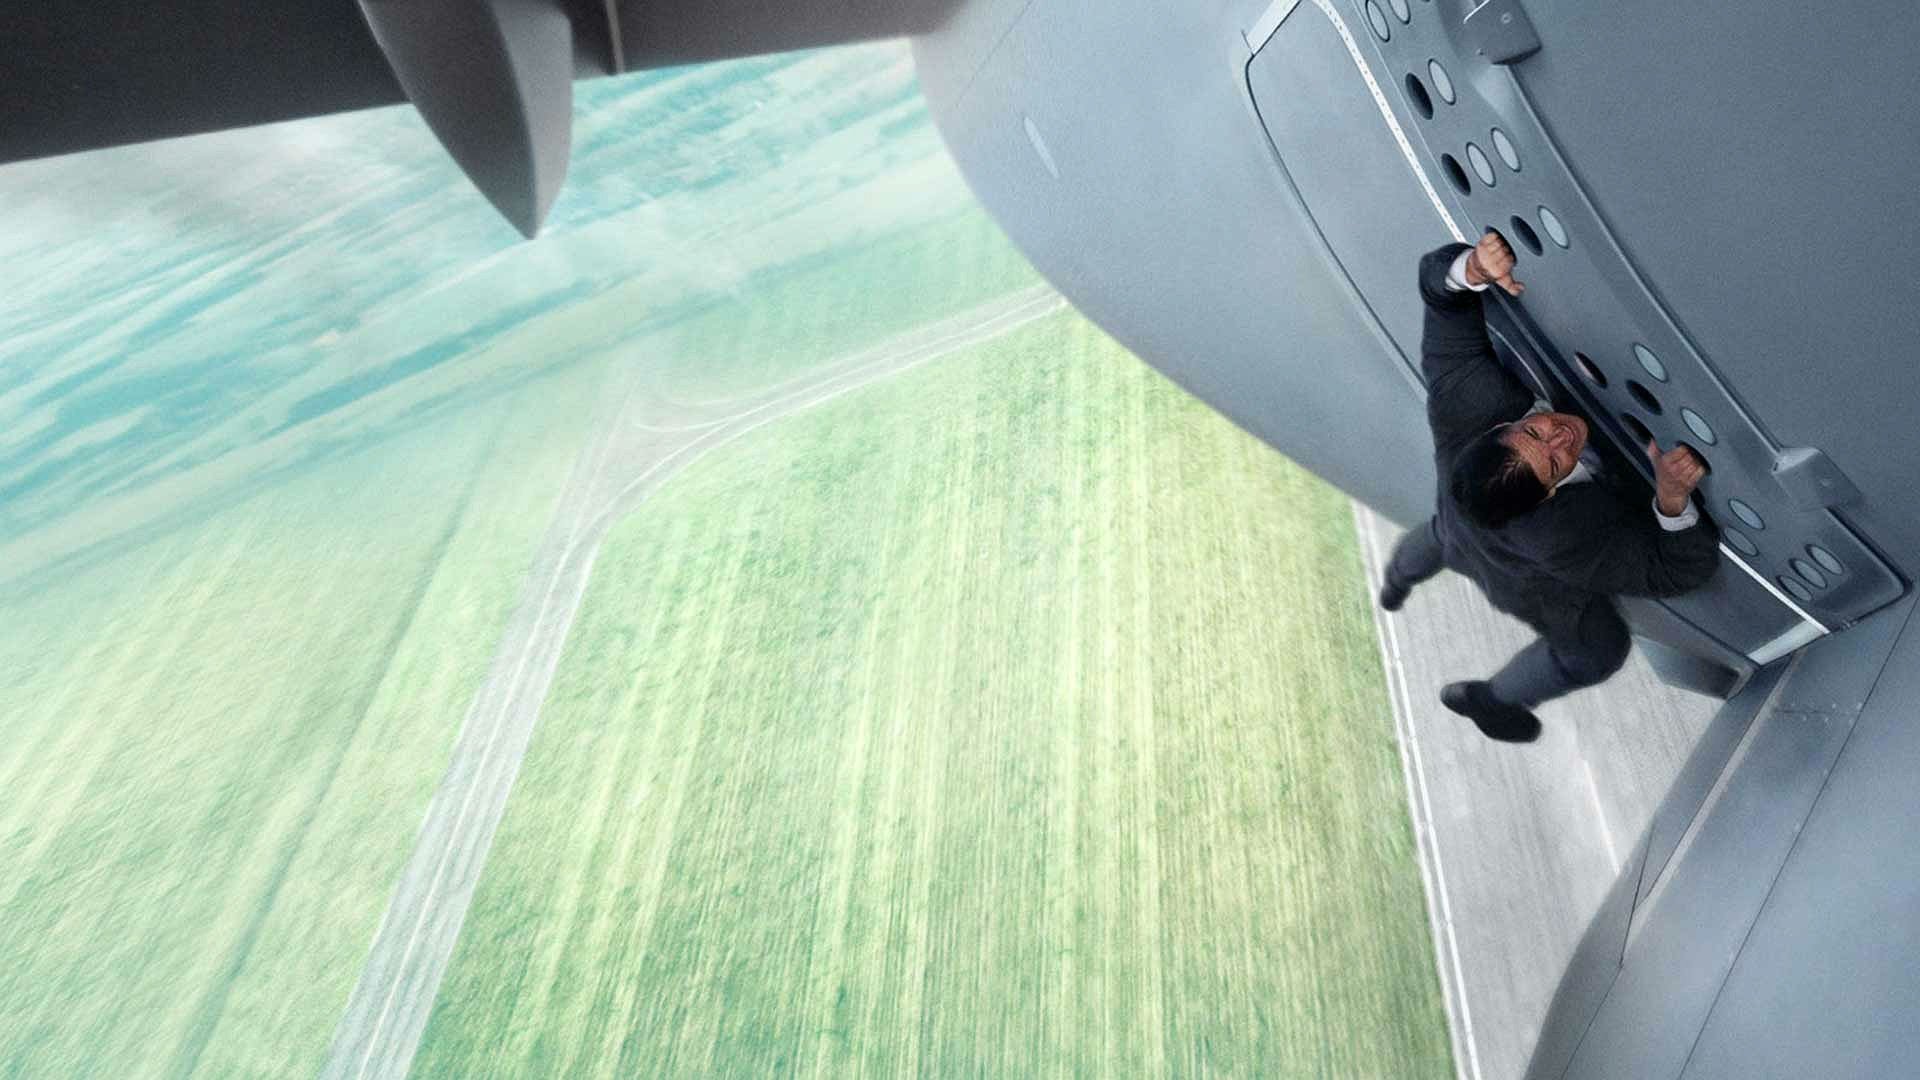 Mission: Impossible - Rogue Nation Wallpapers